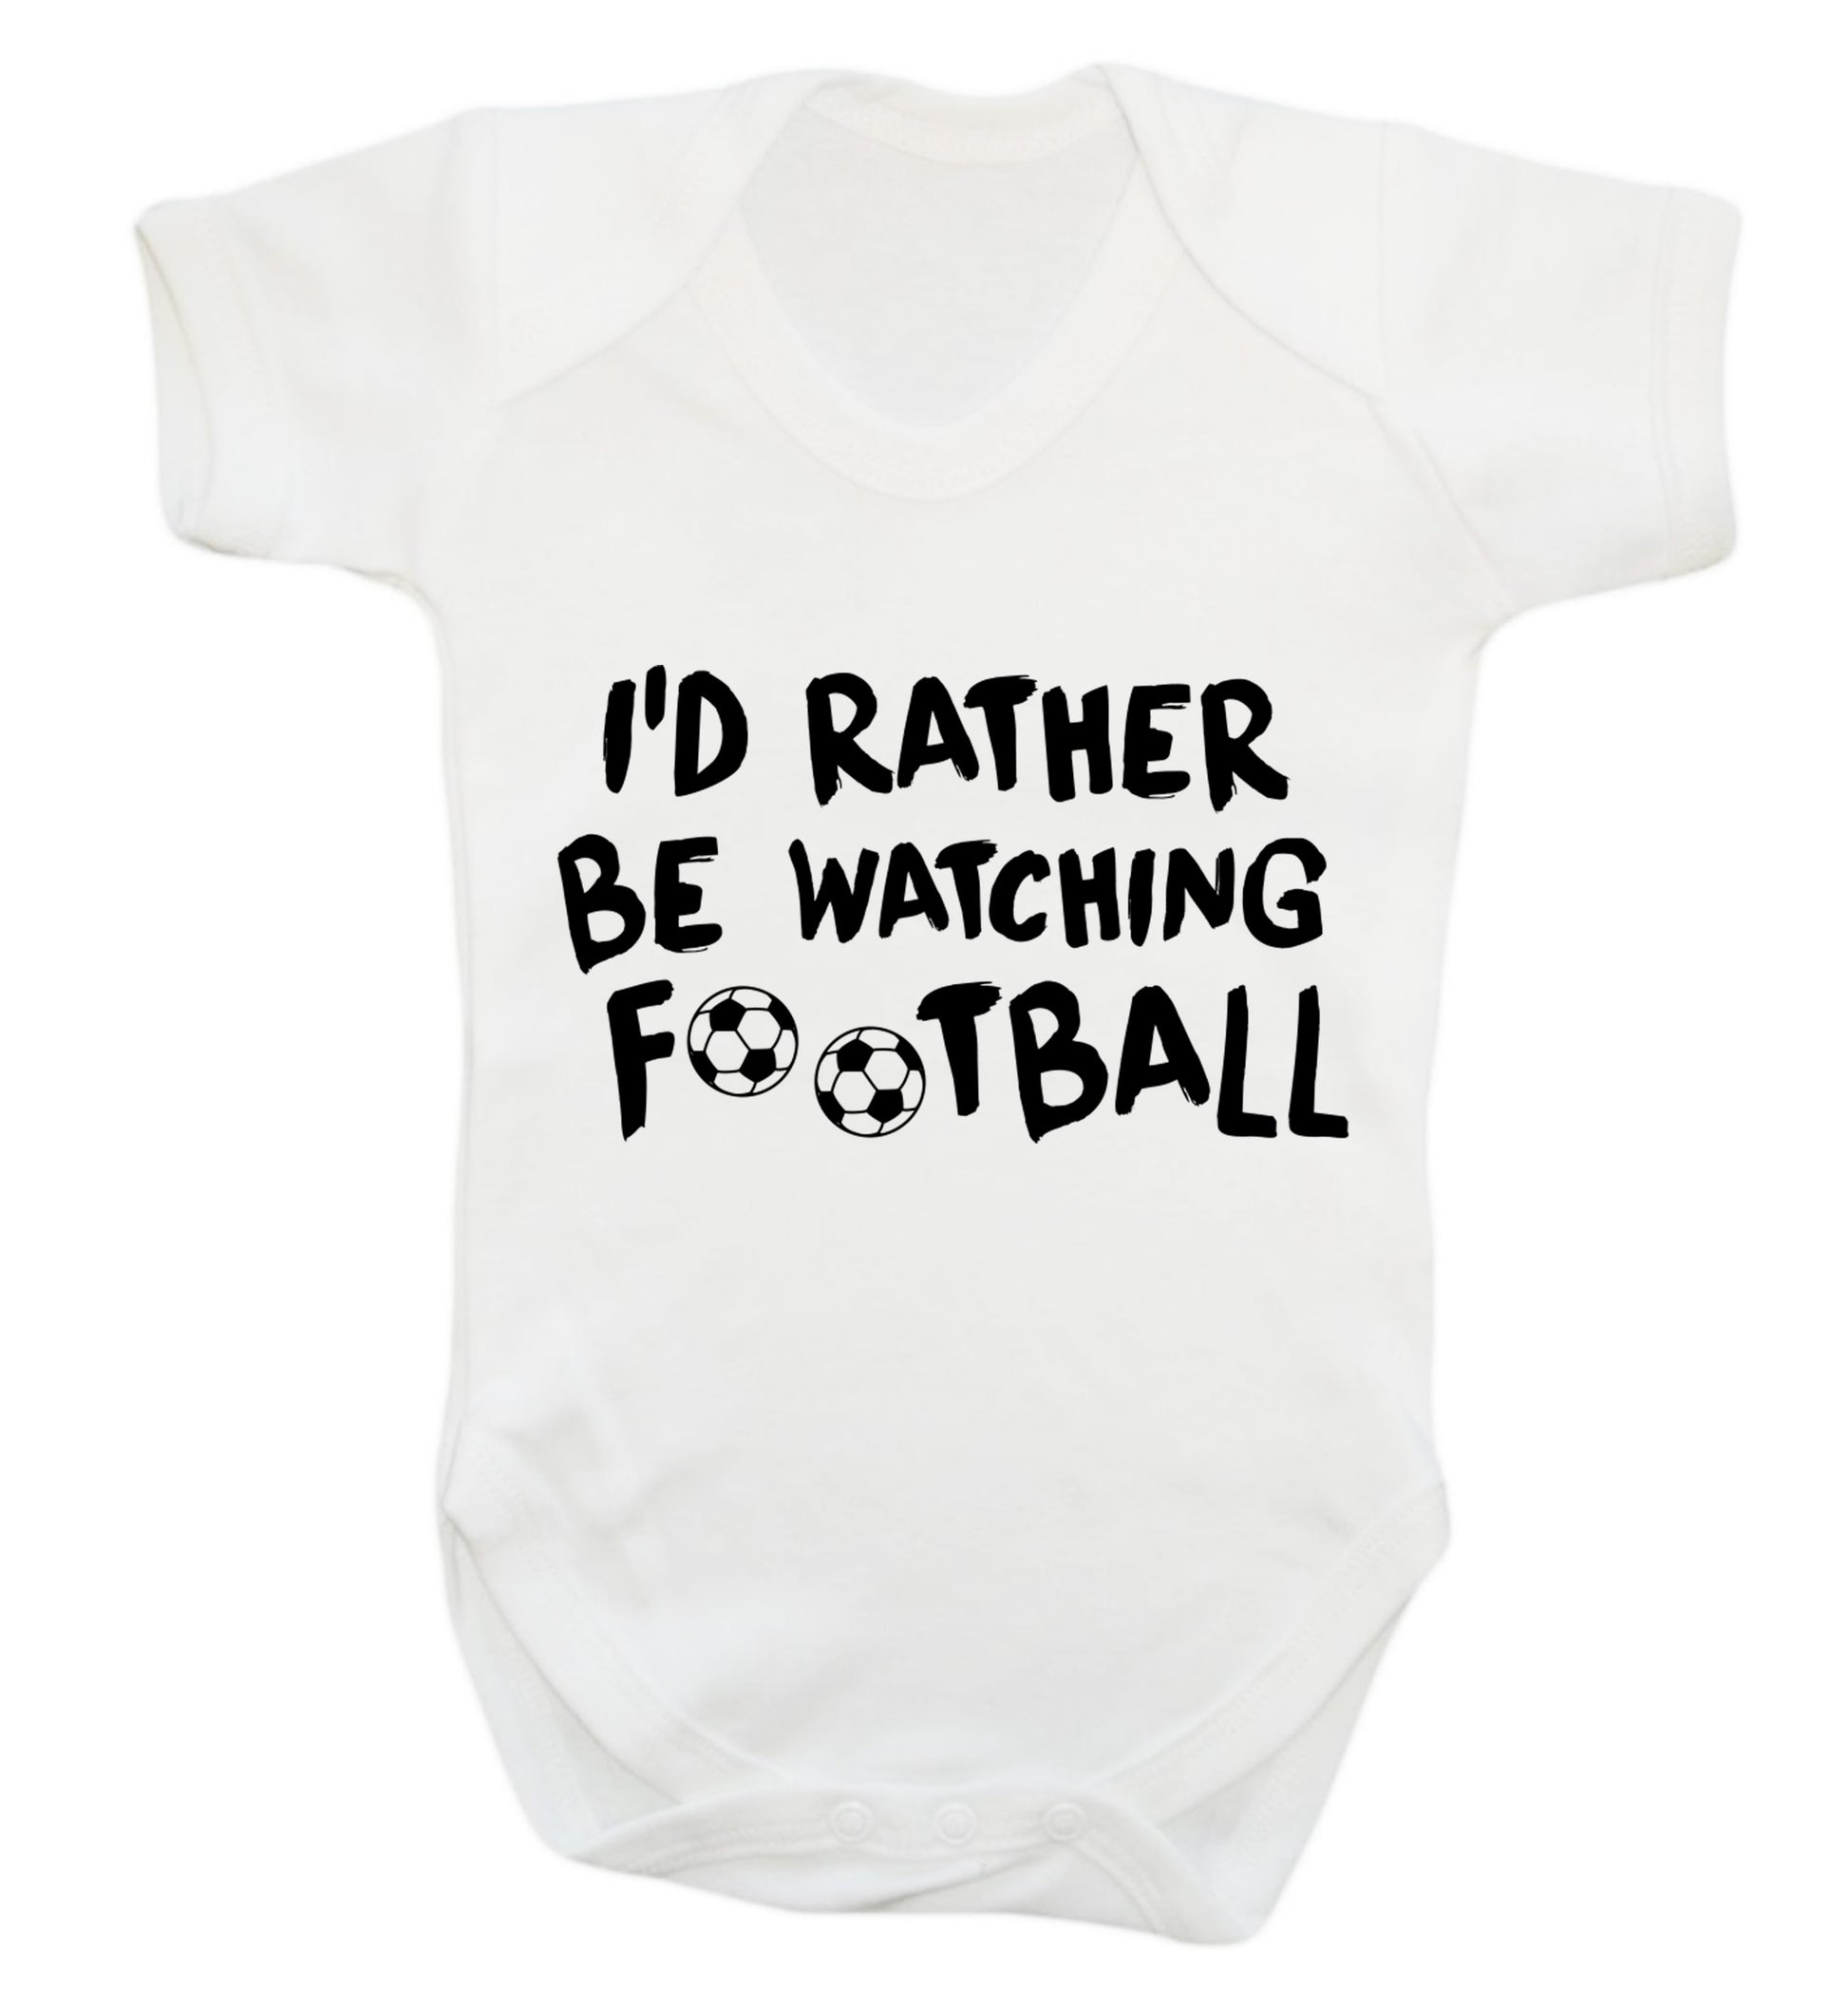 I'd rather be watching football Baby Vest white 18-24 months